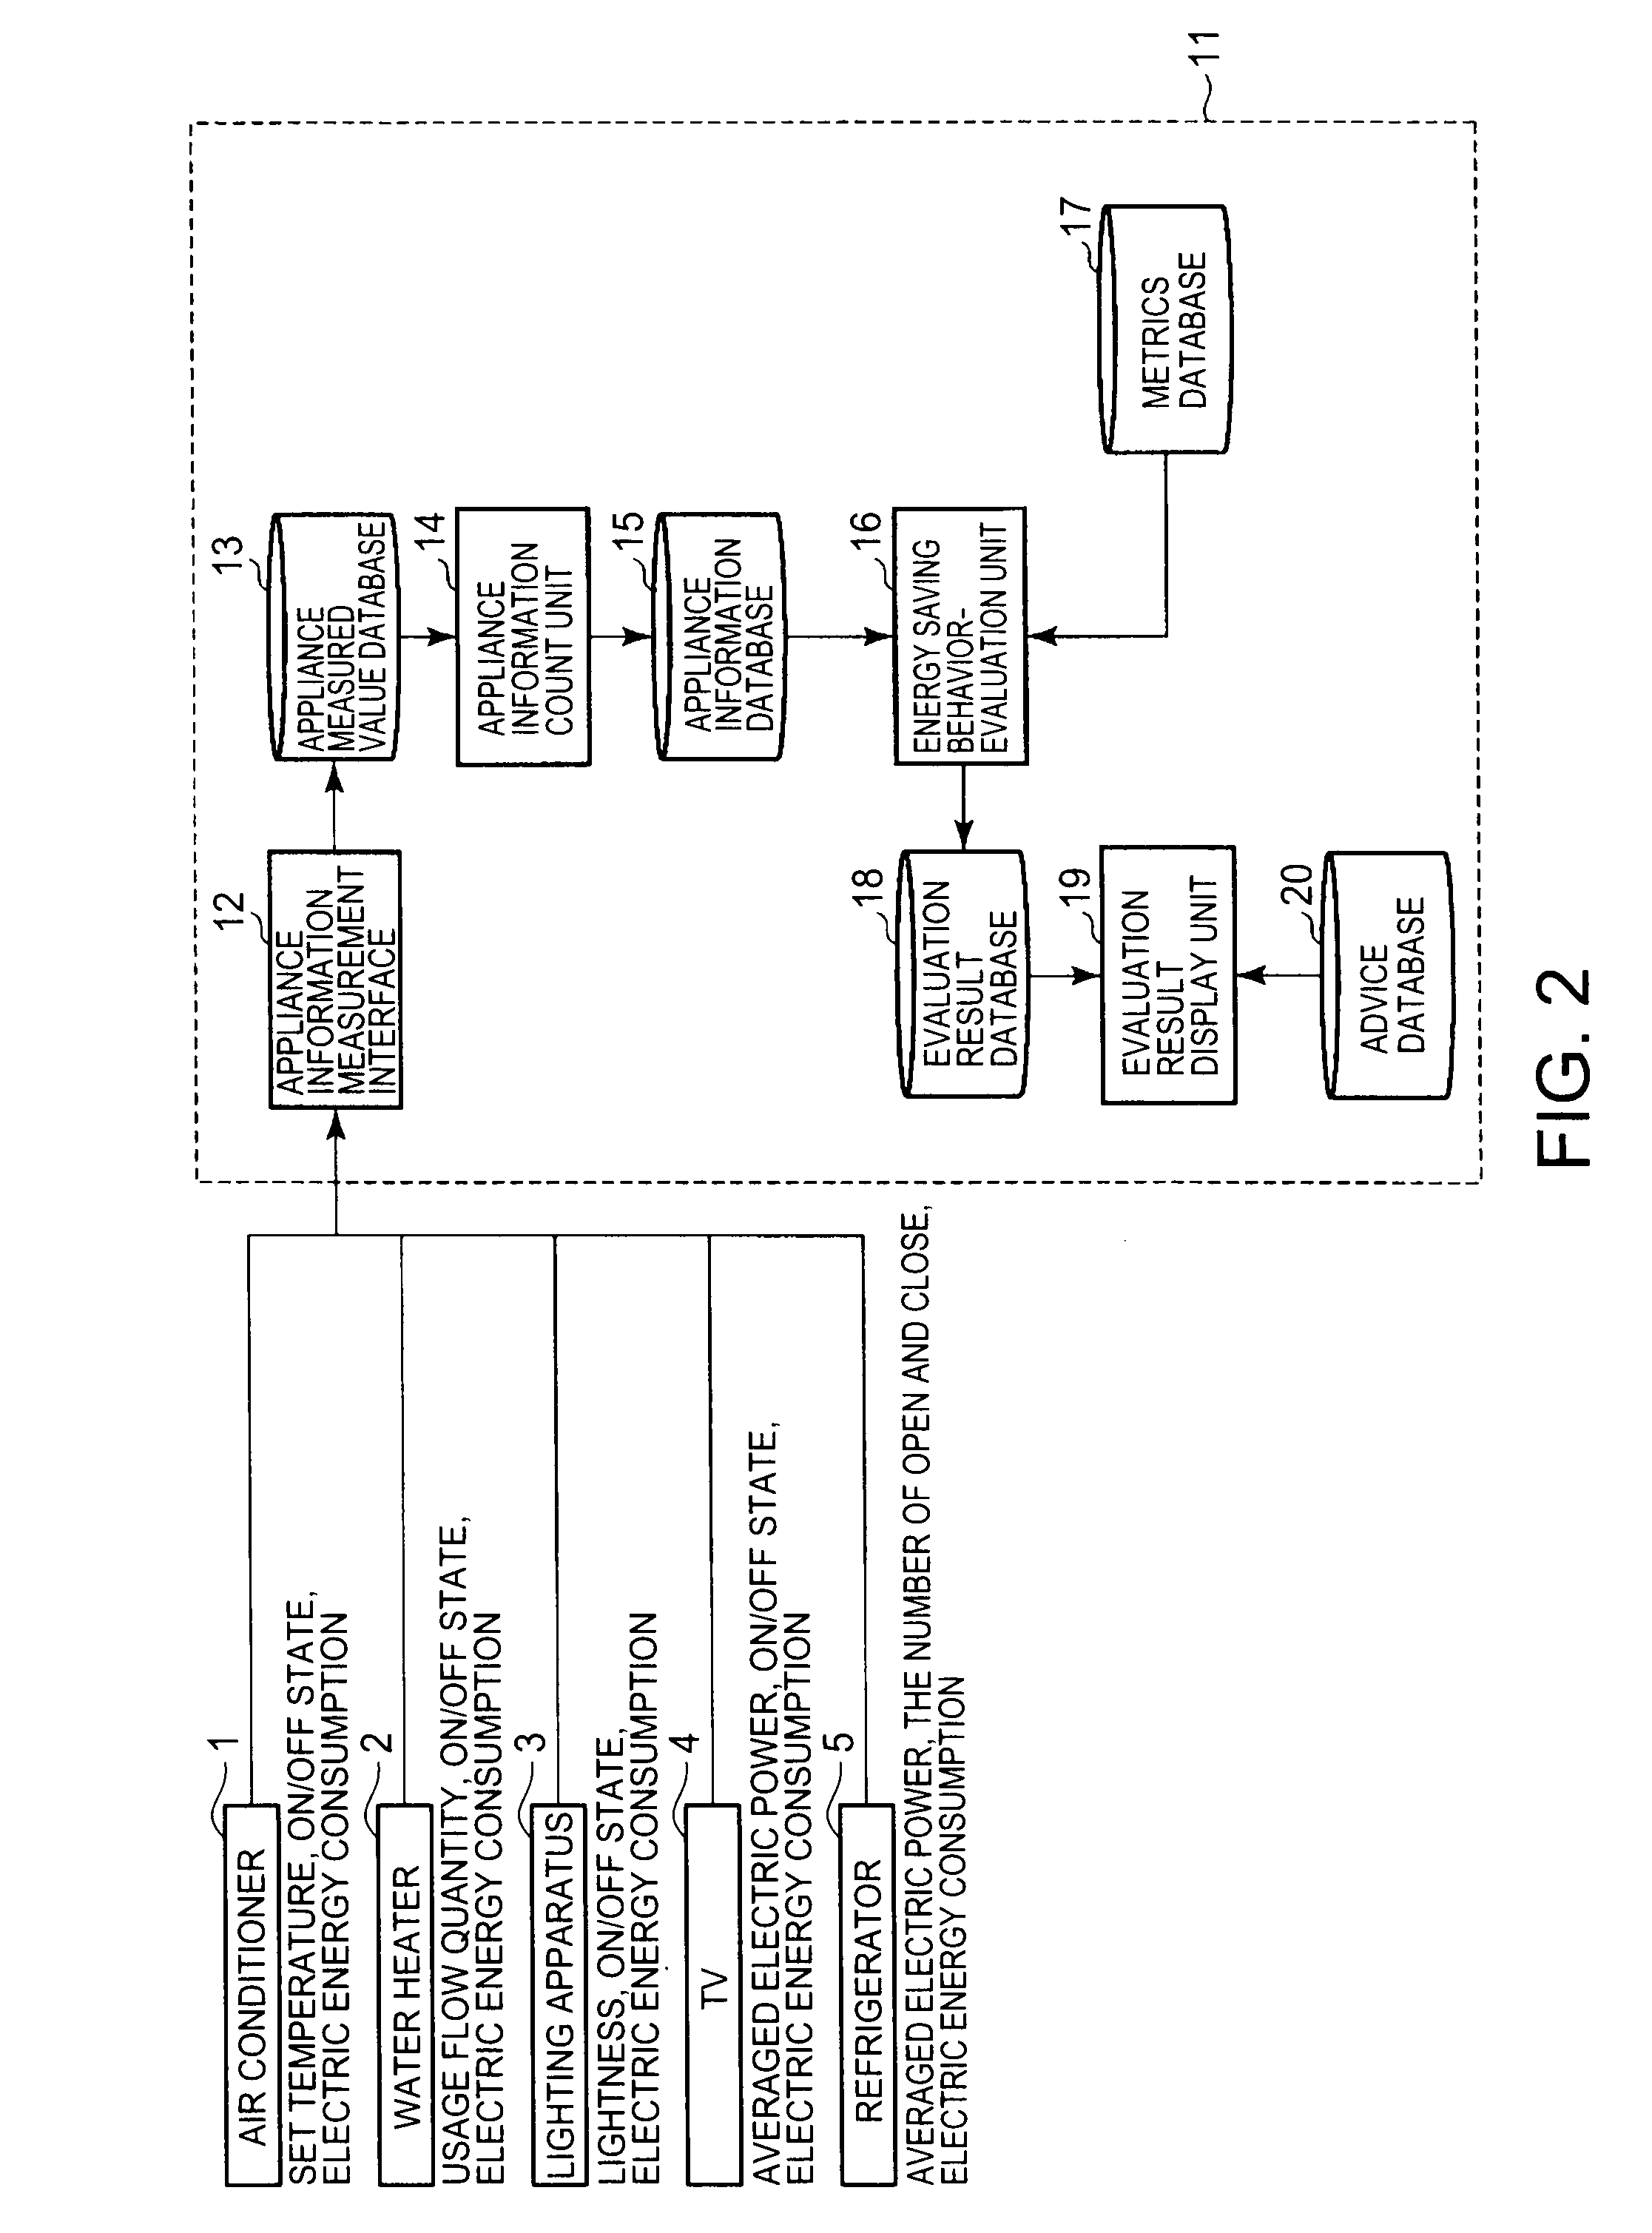 Apparatus and method for evaluating an energy saving behavior